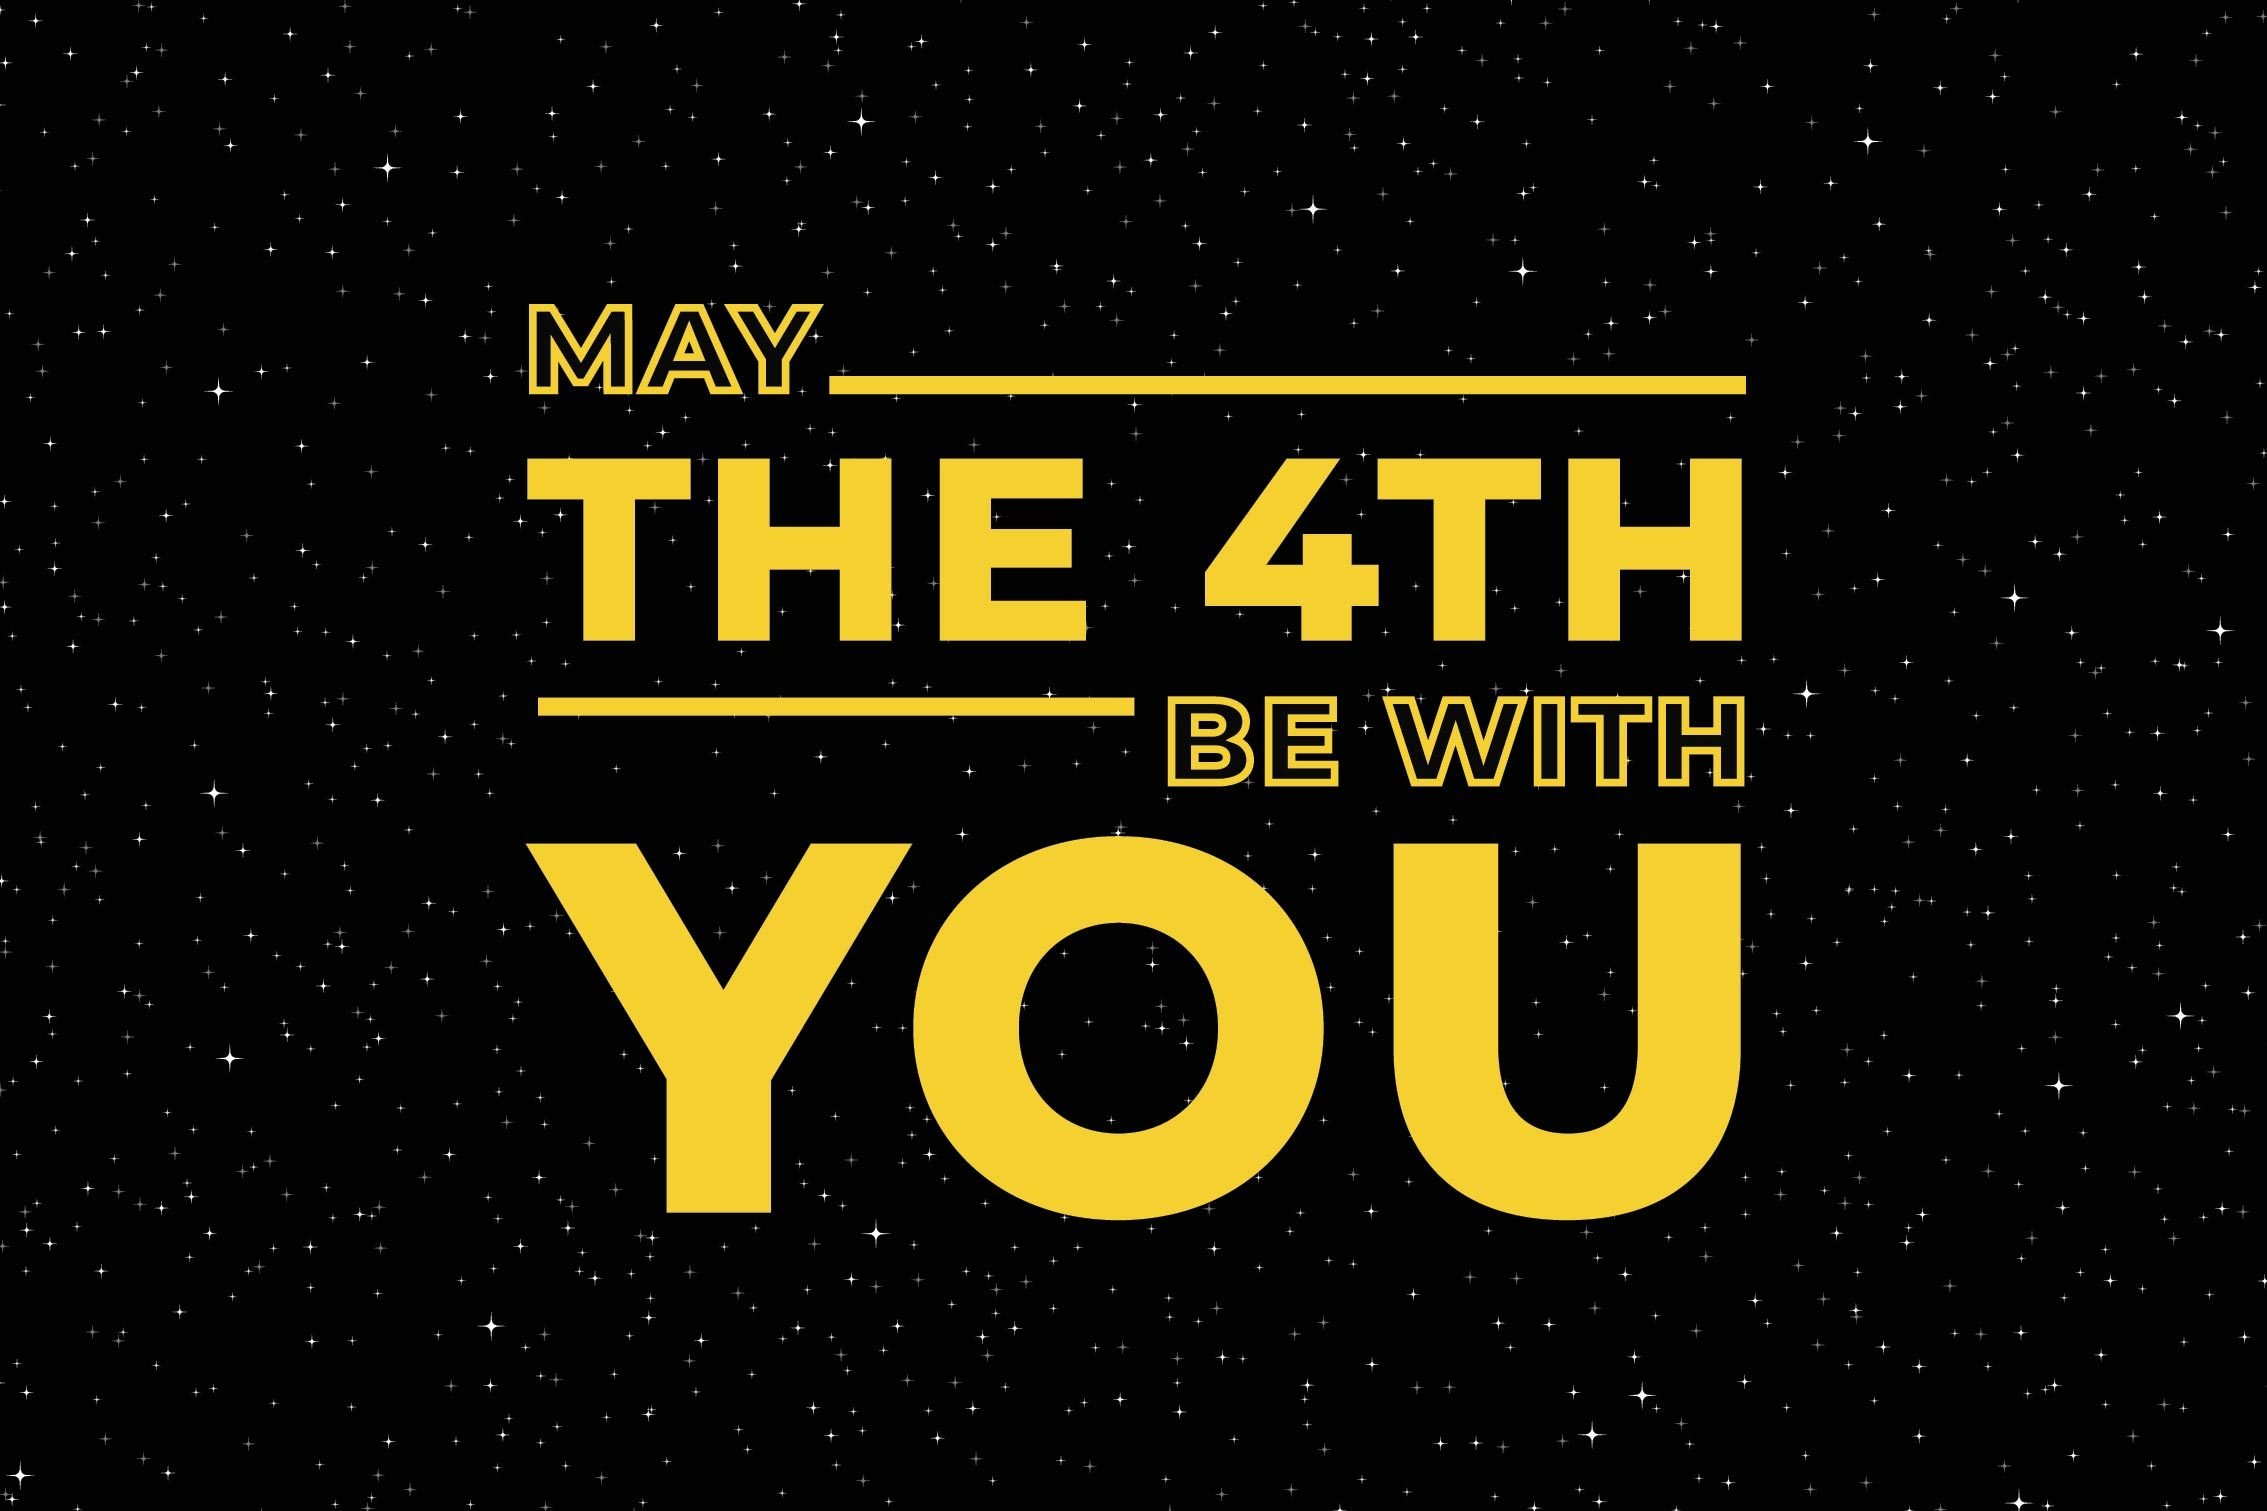 Wine Time: May the wine be with you for May the Fourth